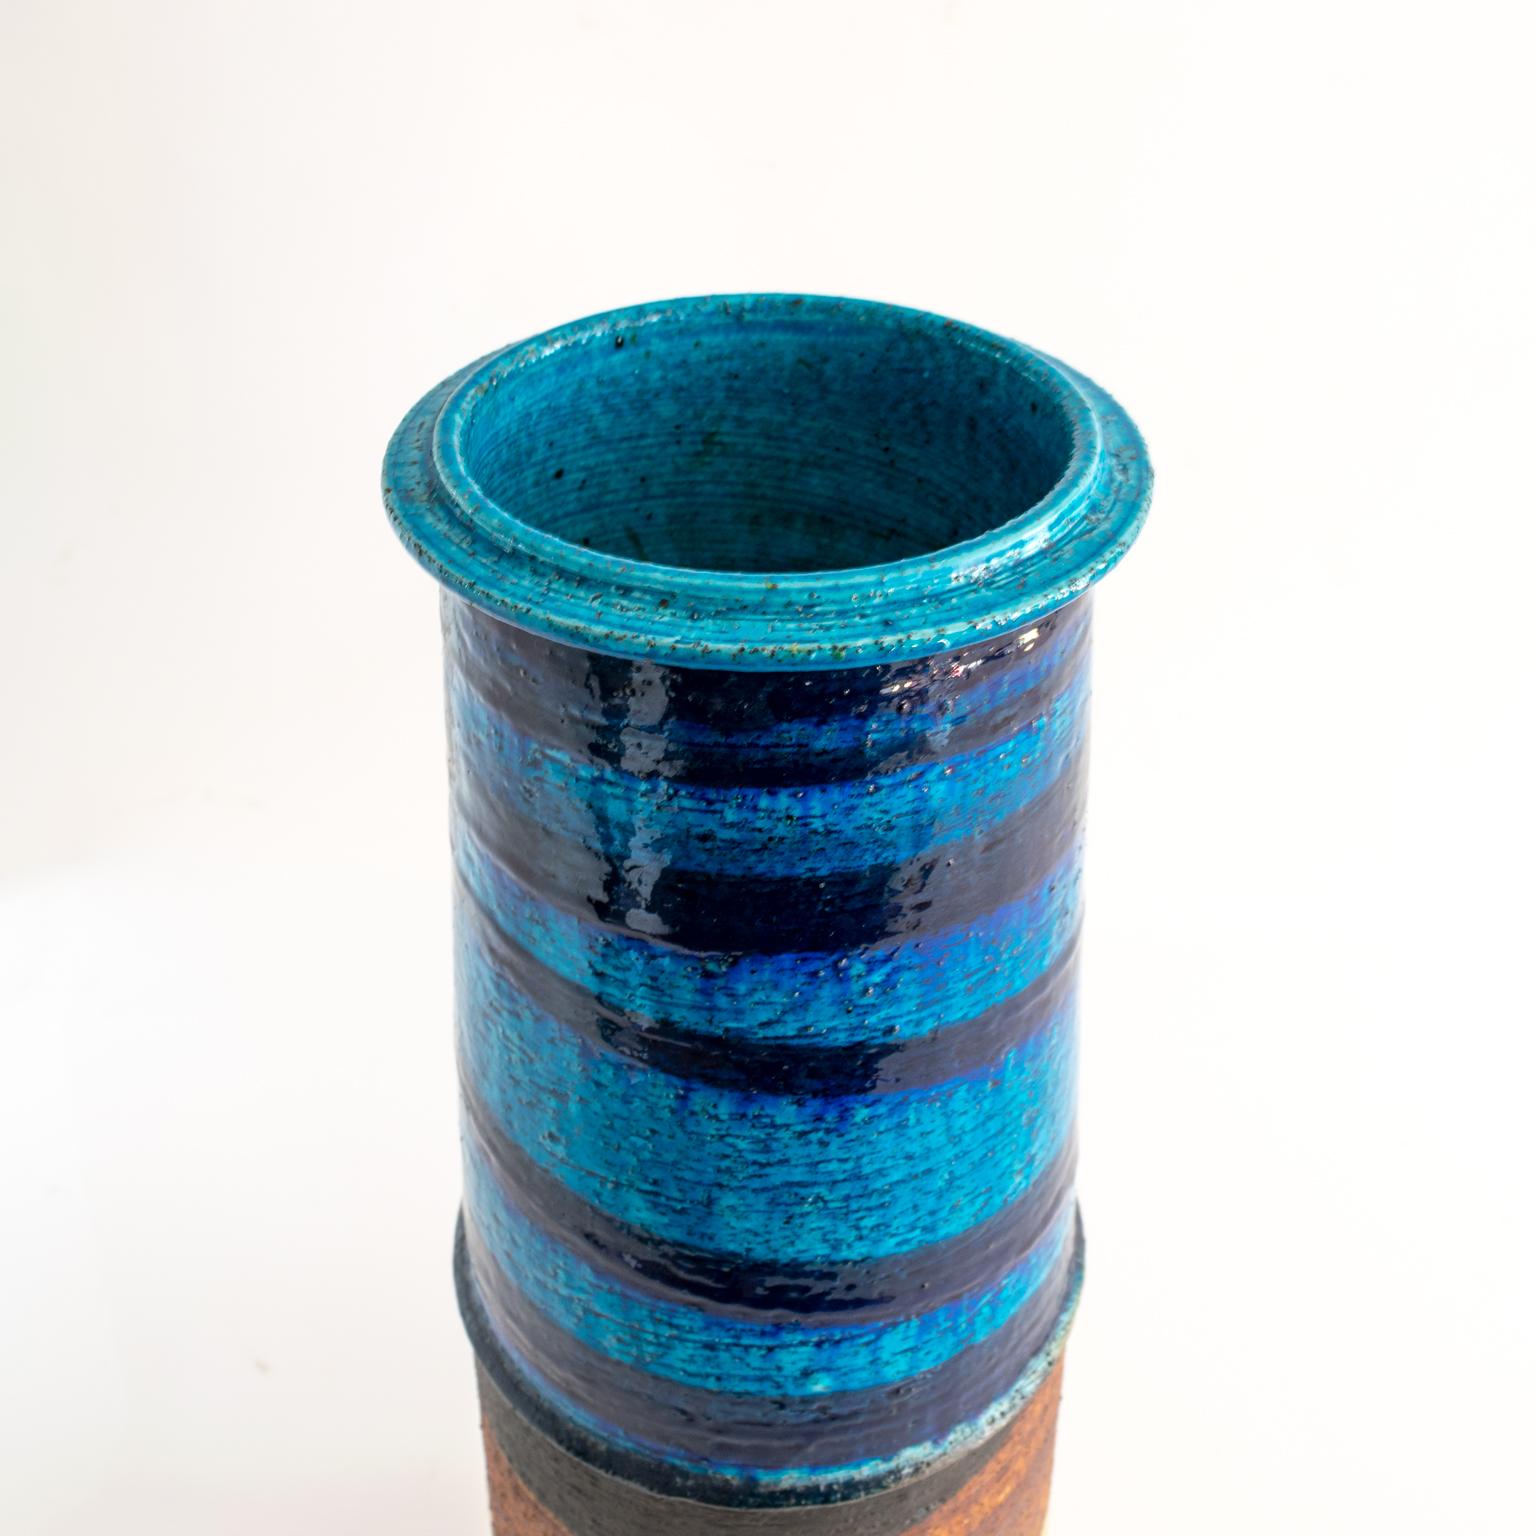 Hand-Crafted Tall Rorstrand Studio Vase by Inger Persson Partial Glaze in Blues